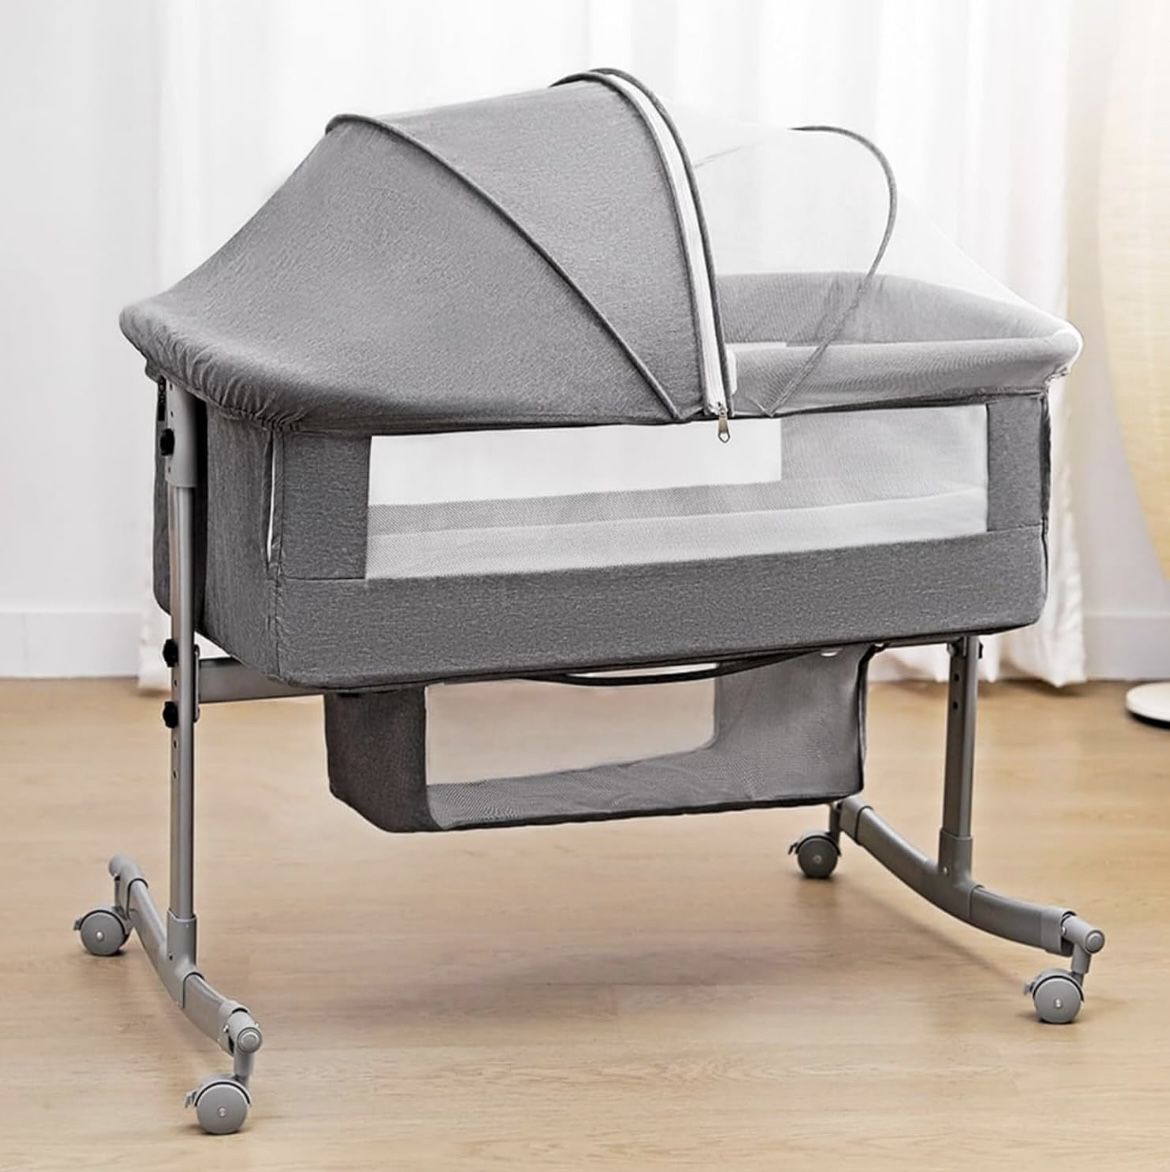 Bedside Crib for Baby, 3 in 1 Bassinet with Large 